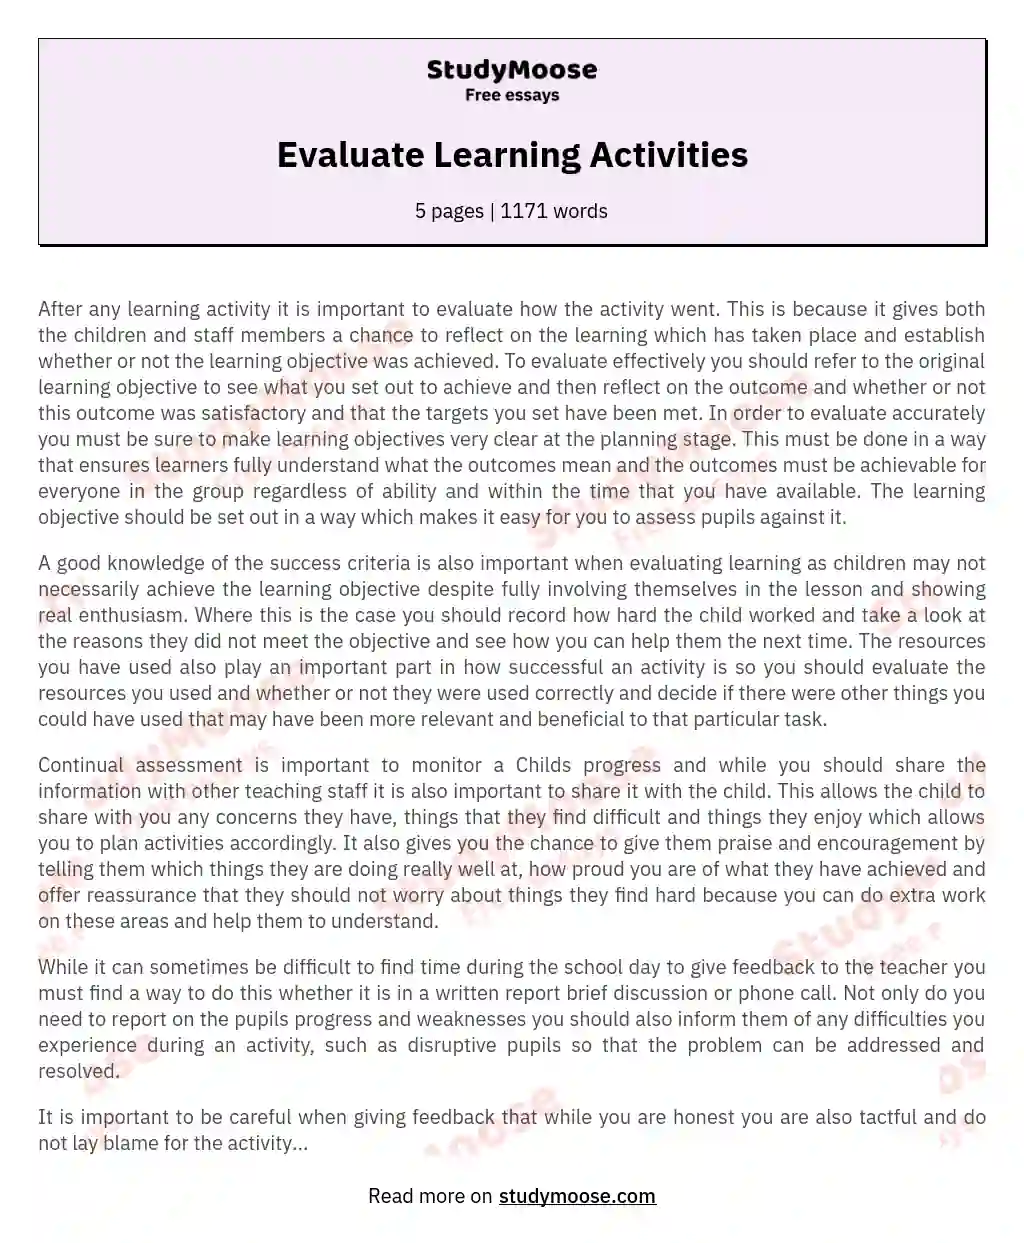 Evaluate Learning Activities essay